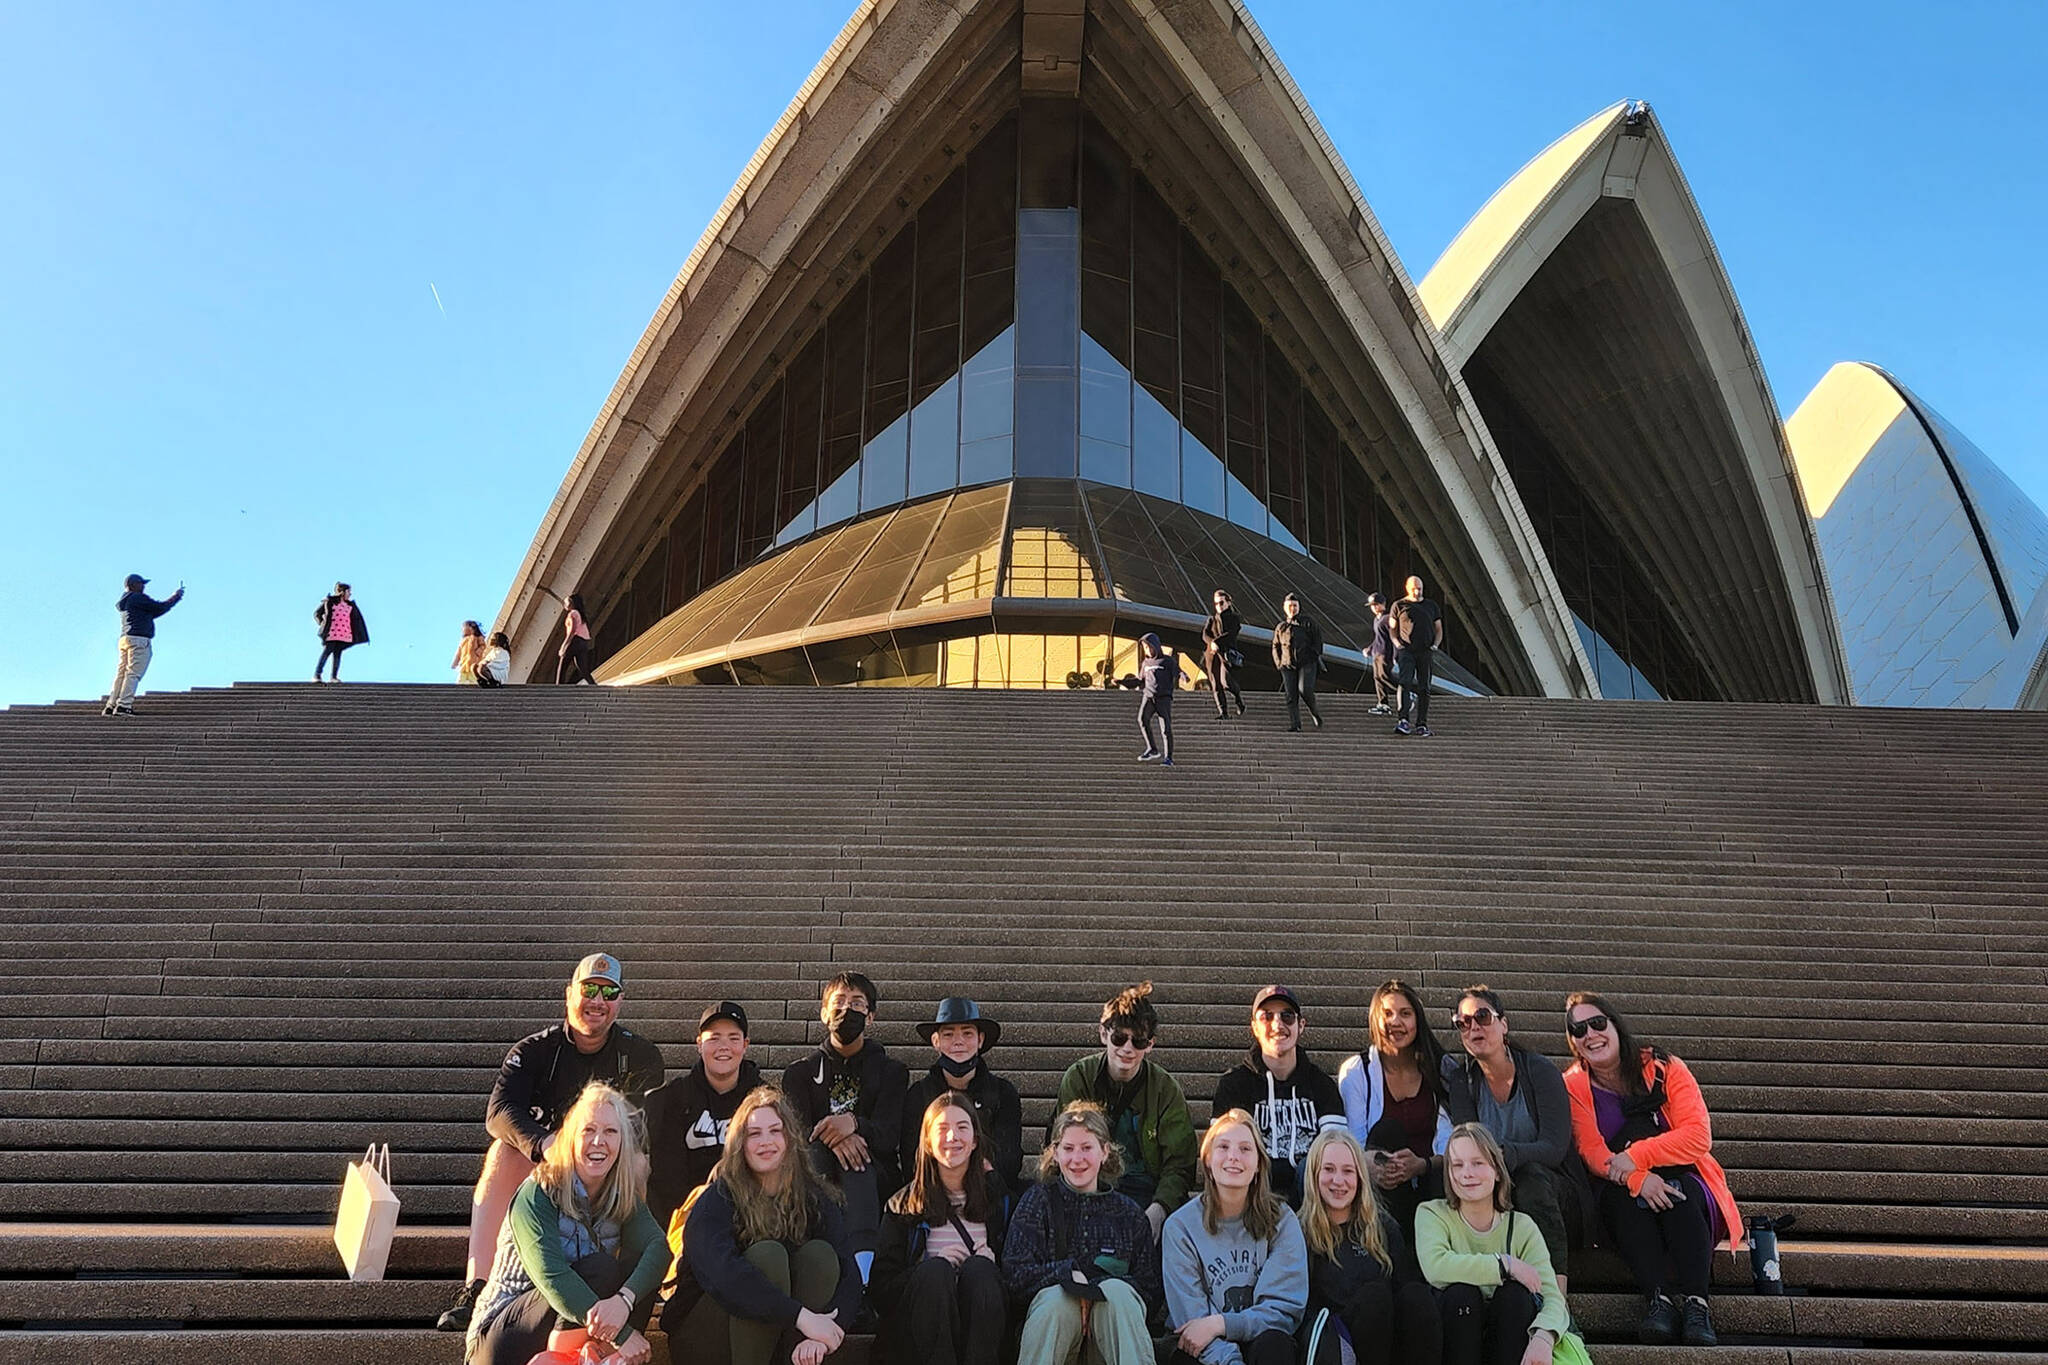 Club members take a private guided tour of Australia’s Sydney Opera House on June 10. (Courtesy Photo / Juneau Culture Club)